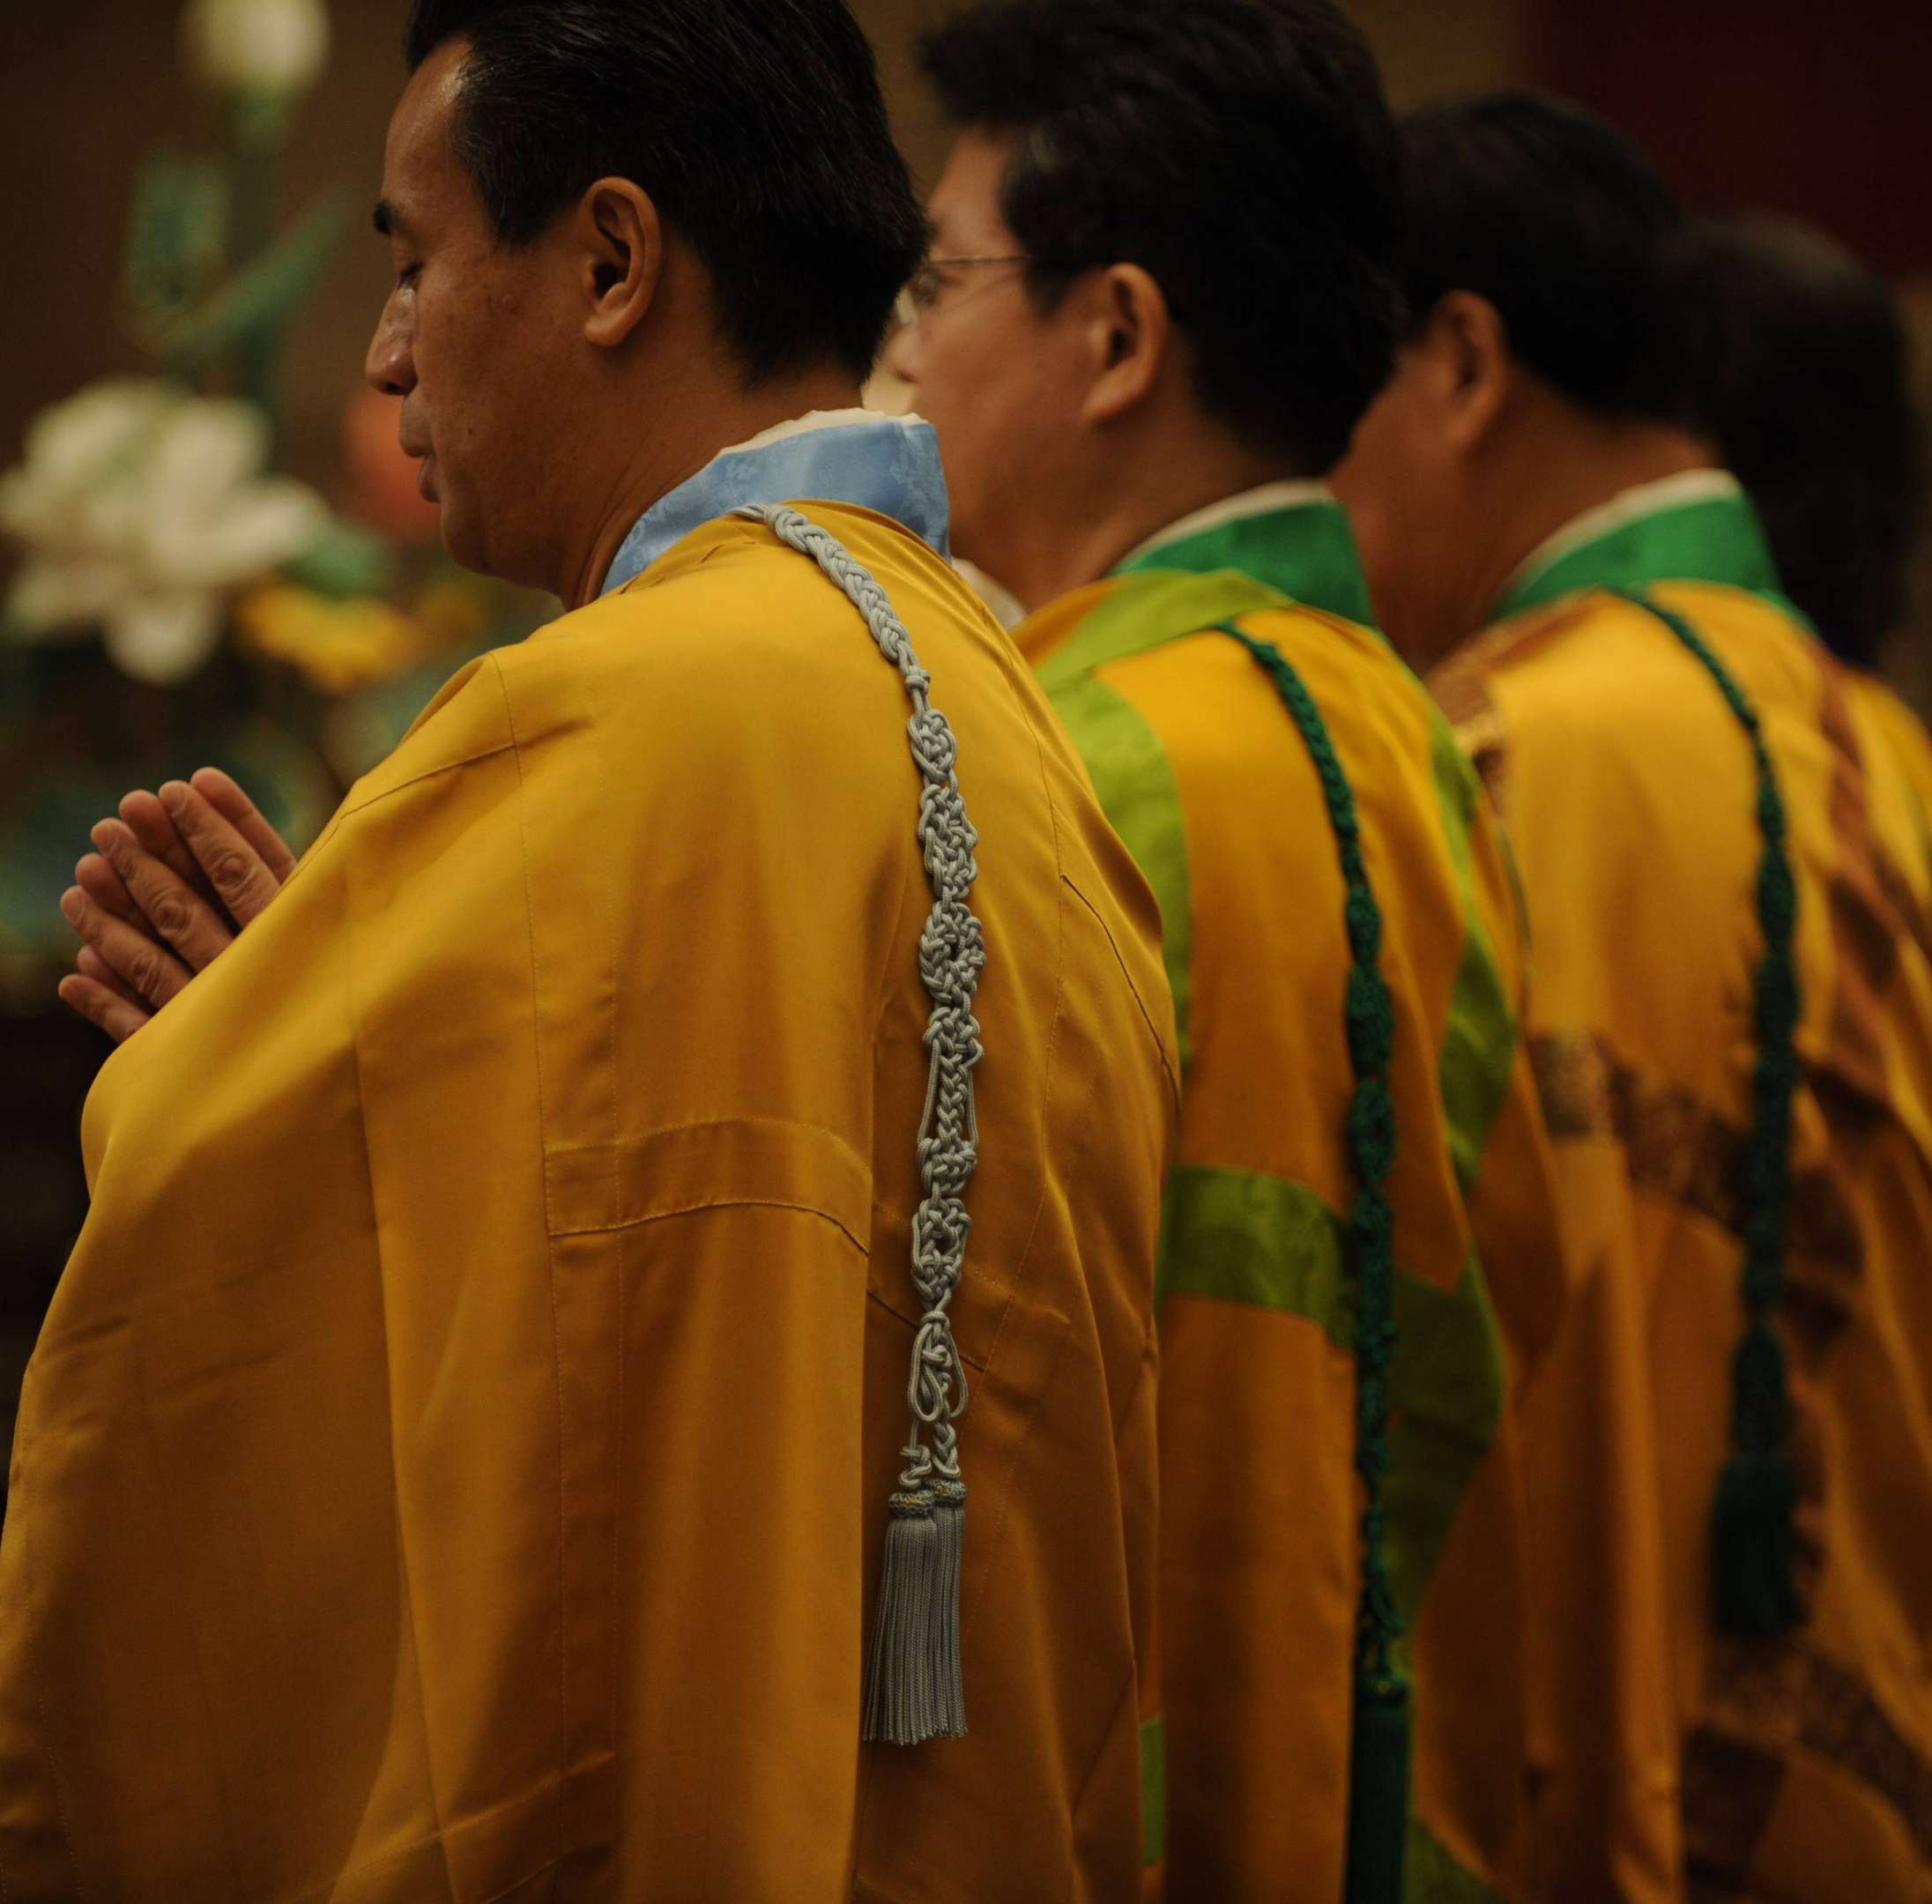 Three Buddhist priests in yellow robes, wearing green and blue kesa, and with knotted cords over their left shoulders, stand with hands folded in prayer facing left.